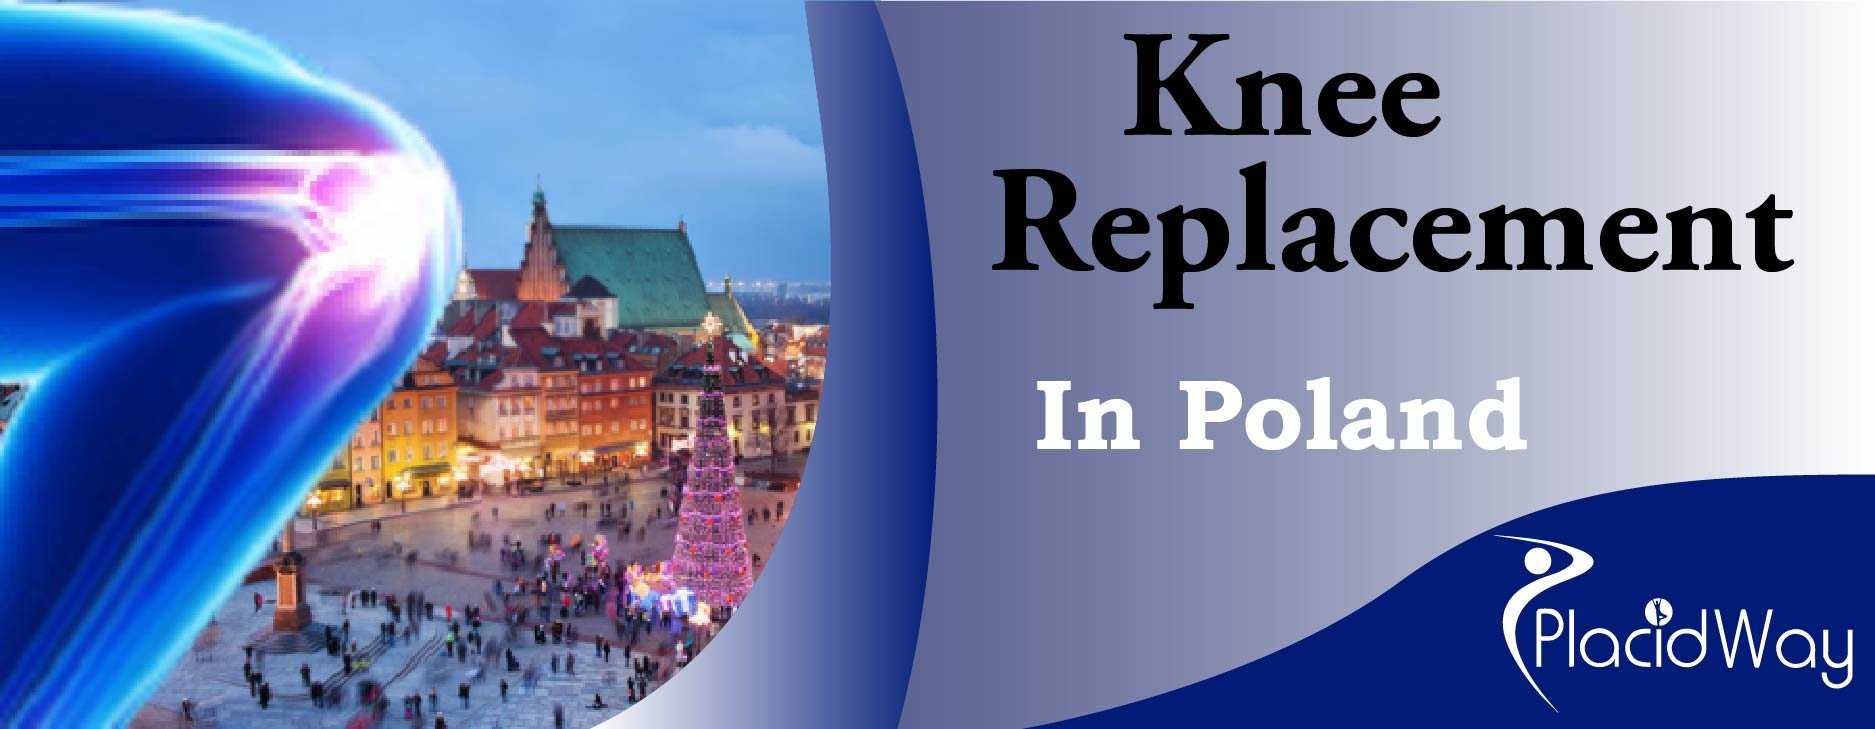 Knee Replacement in Poland, Orthopedic Surgery in Poland